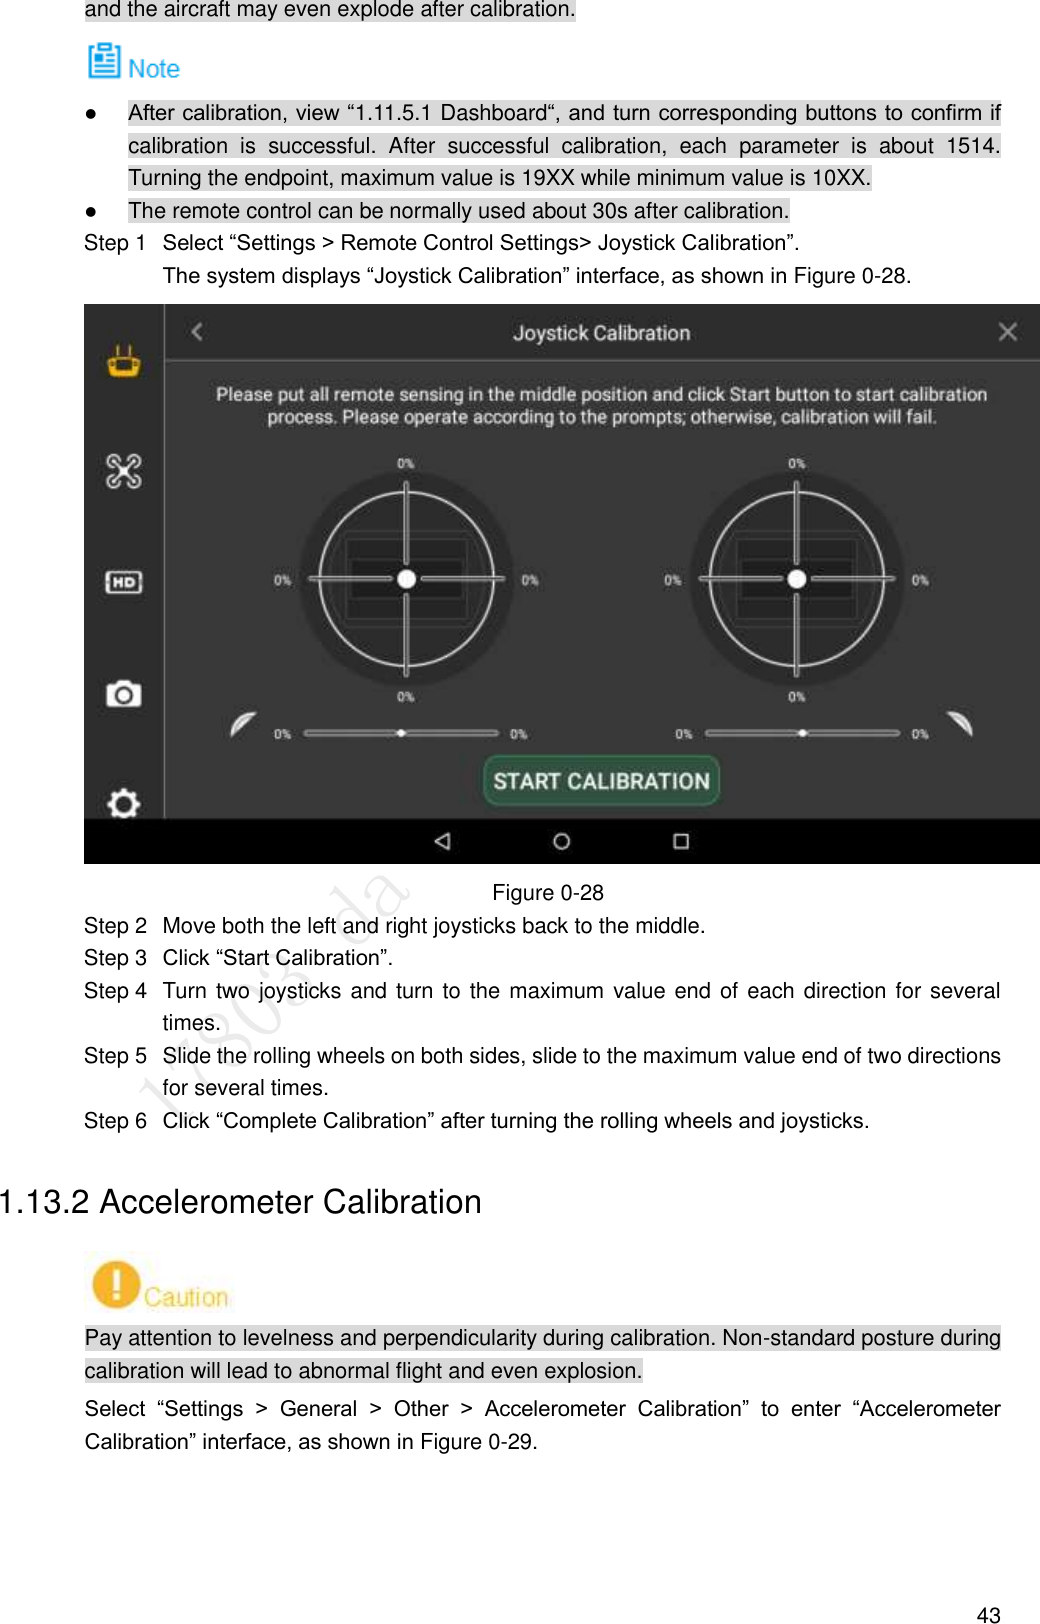  43 and the aircraft may even explode after calibration.   After calibration, view “1.11.5.1 Dashboard“, and turn corresponding buttons to confirm if calibration  is  successful.  After  successful  calibration,  each  parameter  is  about  1514. Turning the endpoint, maximum value is 19XX while minimum value is 10XX.  The remote control can be normally used about 30s after calibration.  Select “Settings &gt; Remote Control Settings&gt; Joystick Calibration”.     Step 1The system displays “Joystick Calibration” interface, as shown in Figure 0-28.   Figure 0-28   Move both the left and right joysticks back to the middle. Step 2 Click “Start Calibration”. Step 3  Turn two joysticks and turn to the maximum value end of each direction for several Step 4times.   Slide the rolling wheels on both sides, slide to the maximum value end of two directions Step 5for several times.  Click “Complete Calibration” after turning the rolling wheels and joysticks. Step 61.13.2 Accelerometer Calibration  Pay attention to levelness and perpendicularity during calibration. Non-standard posture during calibration will lead to abnormal flight and even explosion. Select  “Settings  &gt;  General  &gt;  Other  &gt;  Accelerometer  Calibration”  to  enter  “Accelerometer Calibration” interface, as shown in Figure 0-29. 